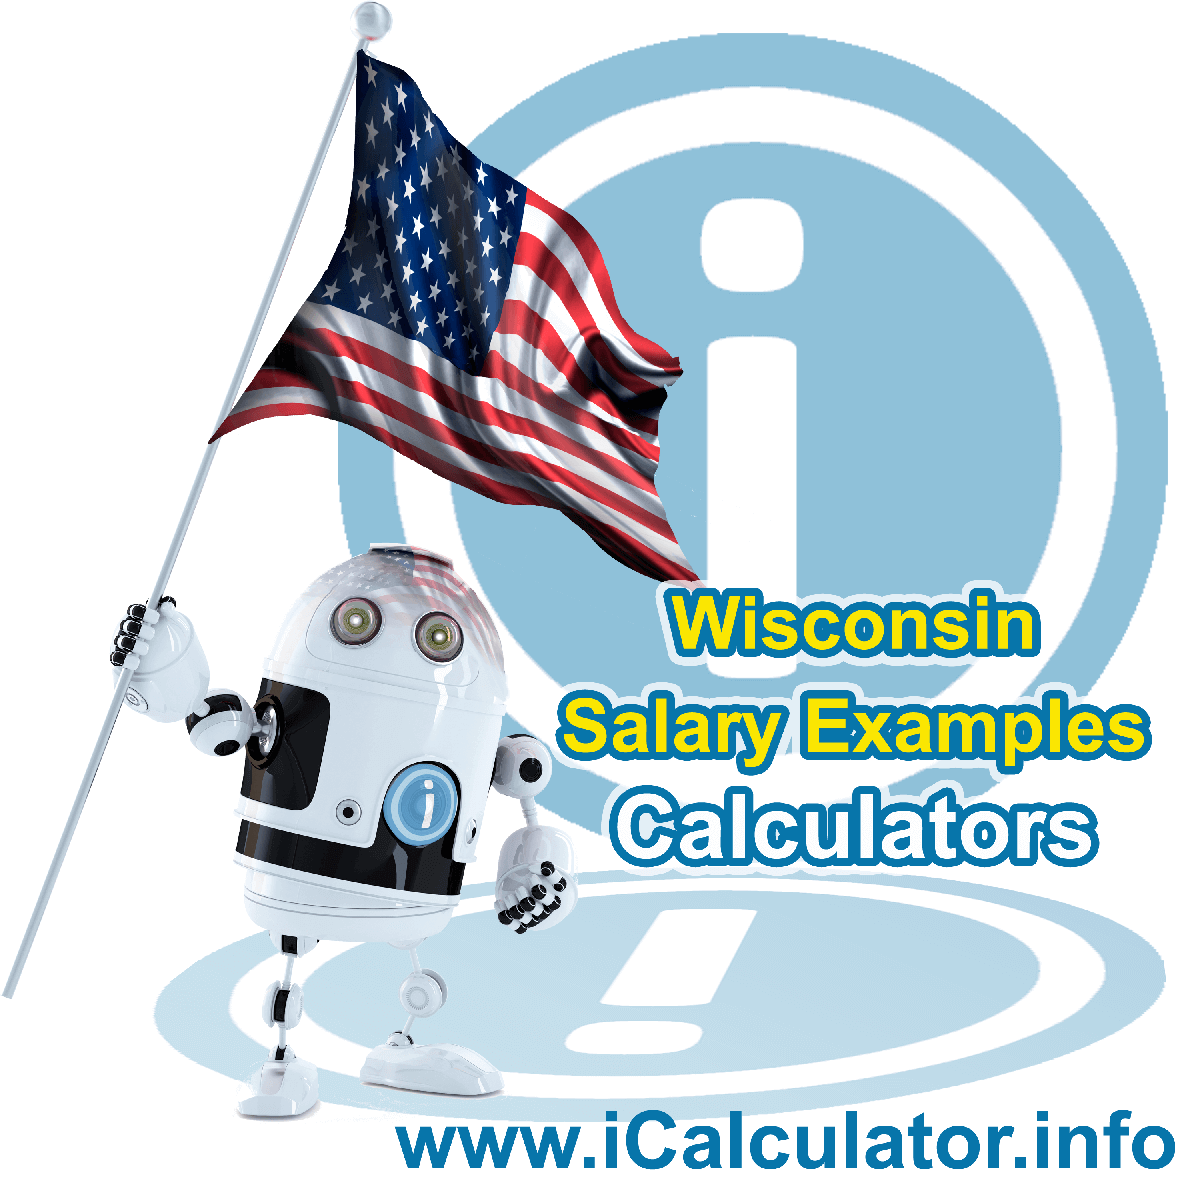 Wisconsin Salary Example for $ 120,000.00 in 2023 | iCalculator™ | $ 120,000.00 salary example for employee and employer paying Wisconsin State tincome taxes. Detailed salary after tax calculation including Wisconsin State Tax, Federal State Tax, Medicare Deductions, Social Security, Capital Gains and other income tax and salary deductions complete with supporting Wisconsin state tax tables 